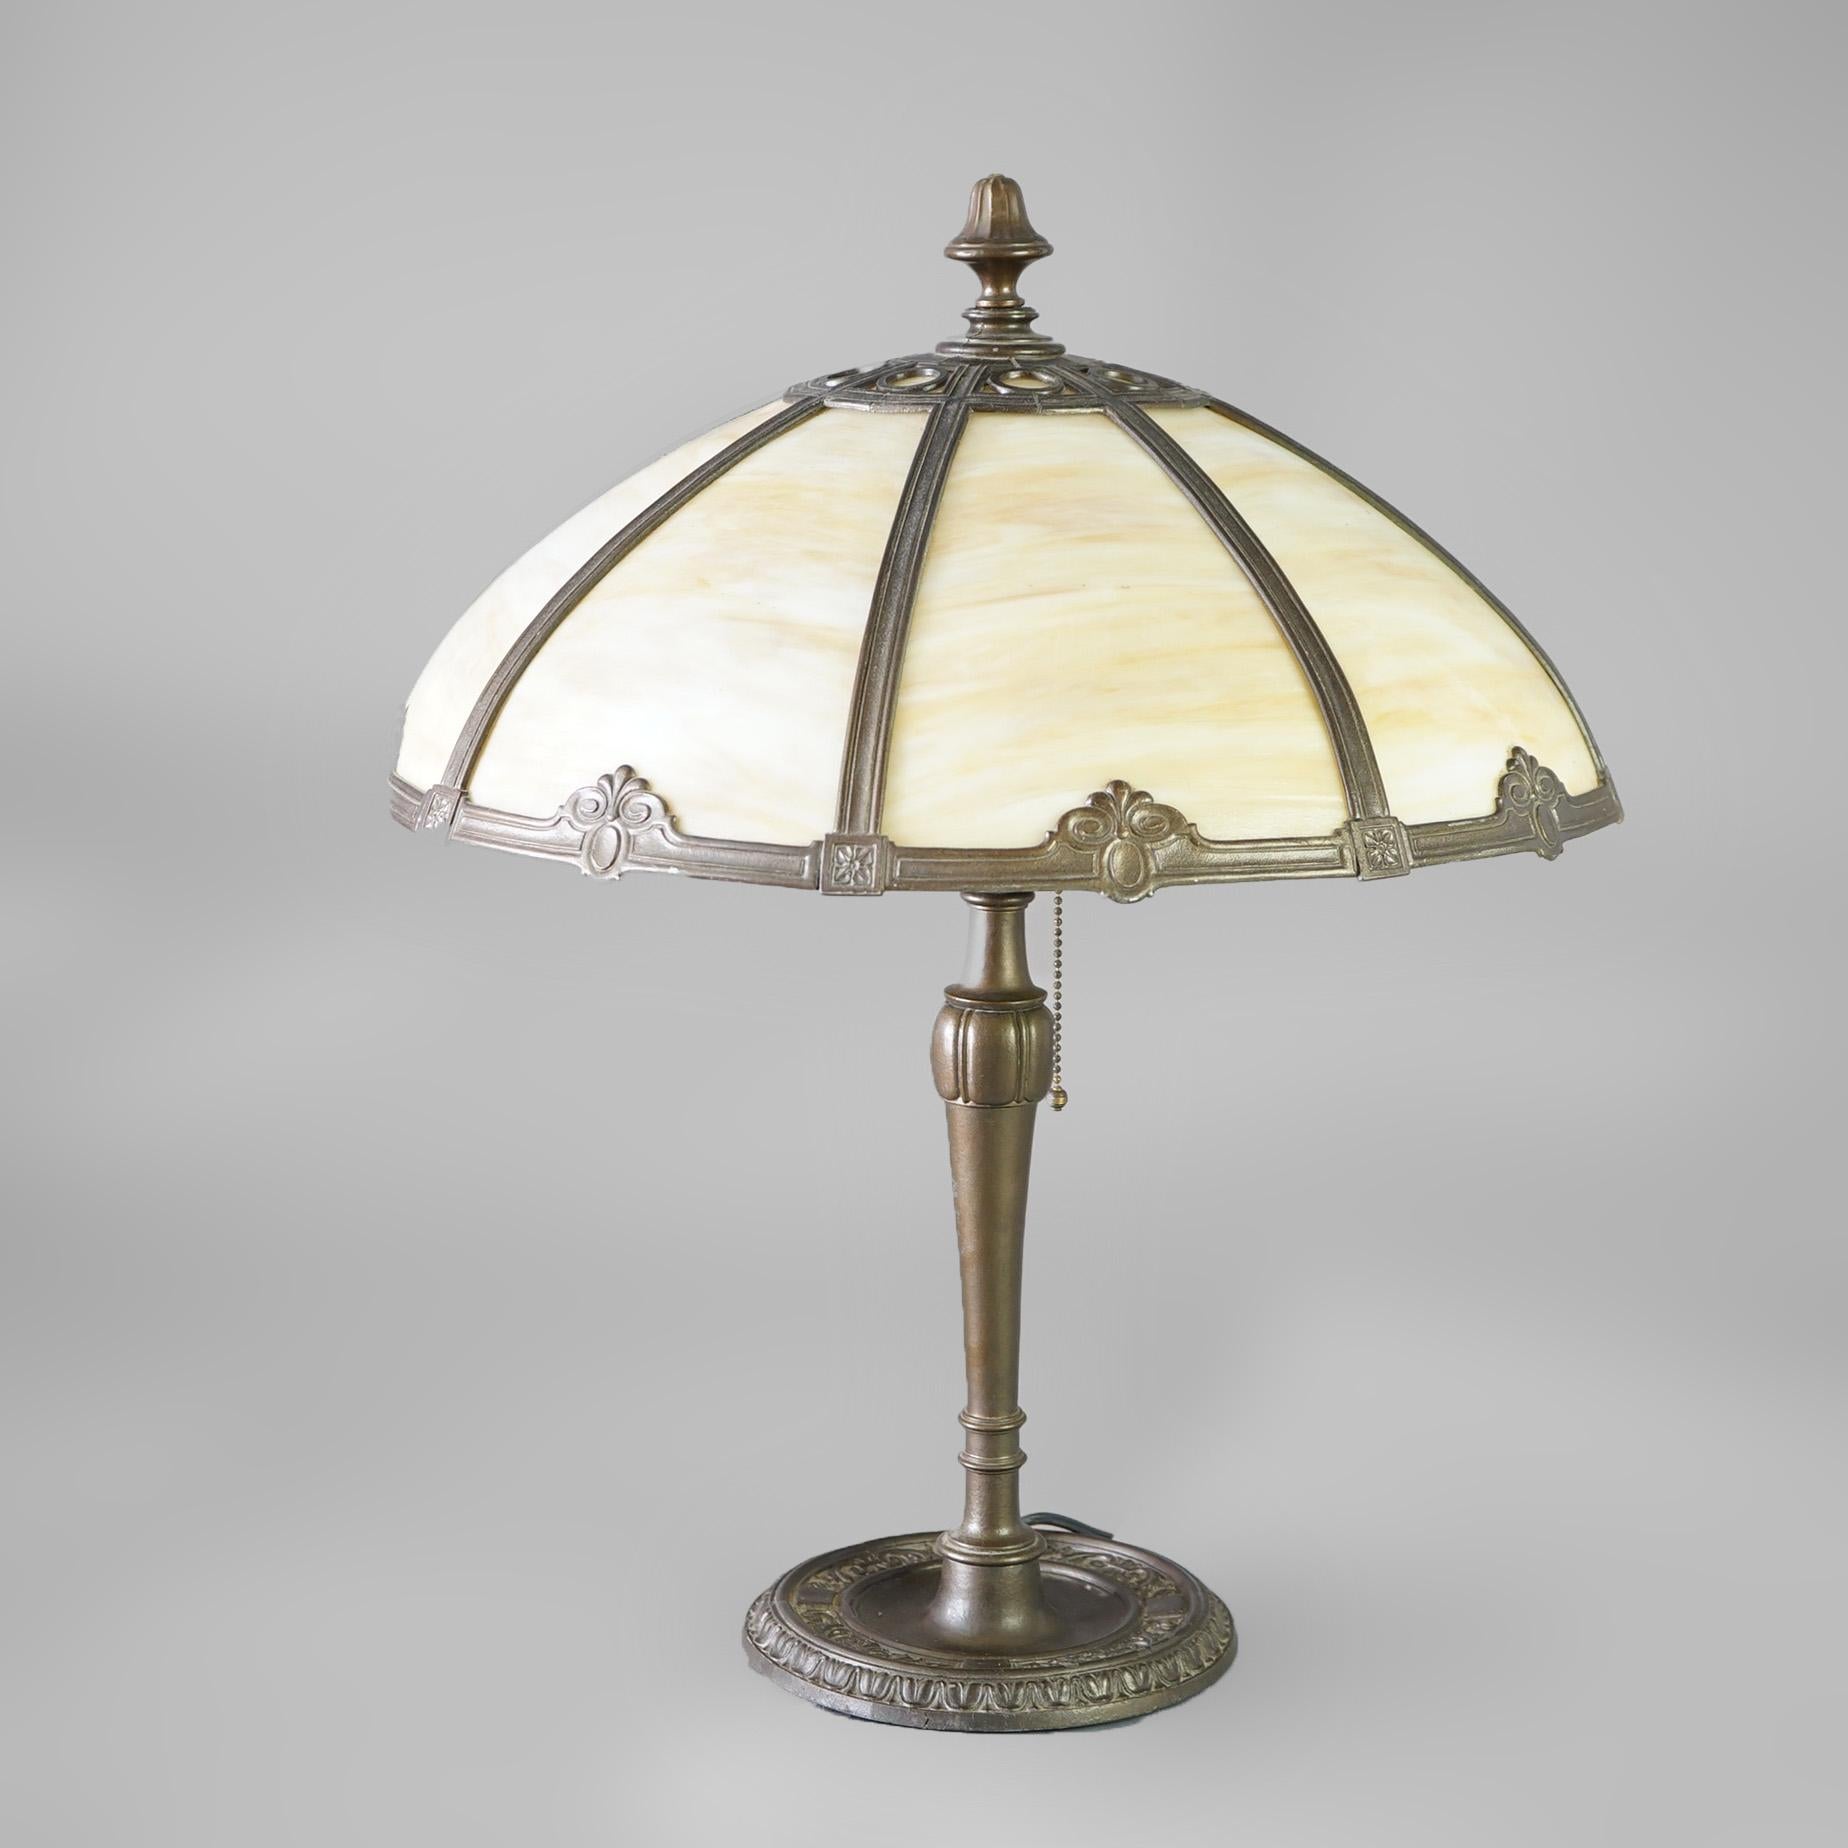 An antique Arts & Crafts table lamp offers dome form shade with frame having stylized floral elements and housing bent slag glass panels, over double socket cast base, c1920

Measures - 23